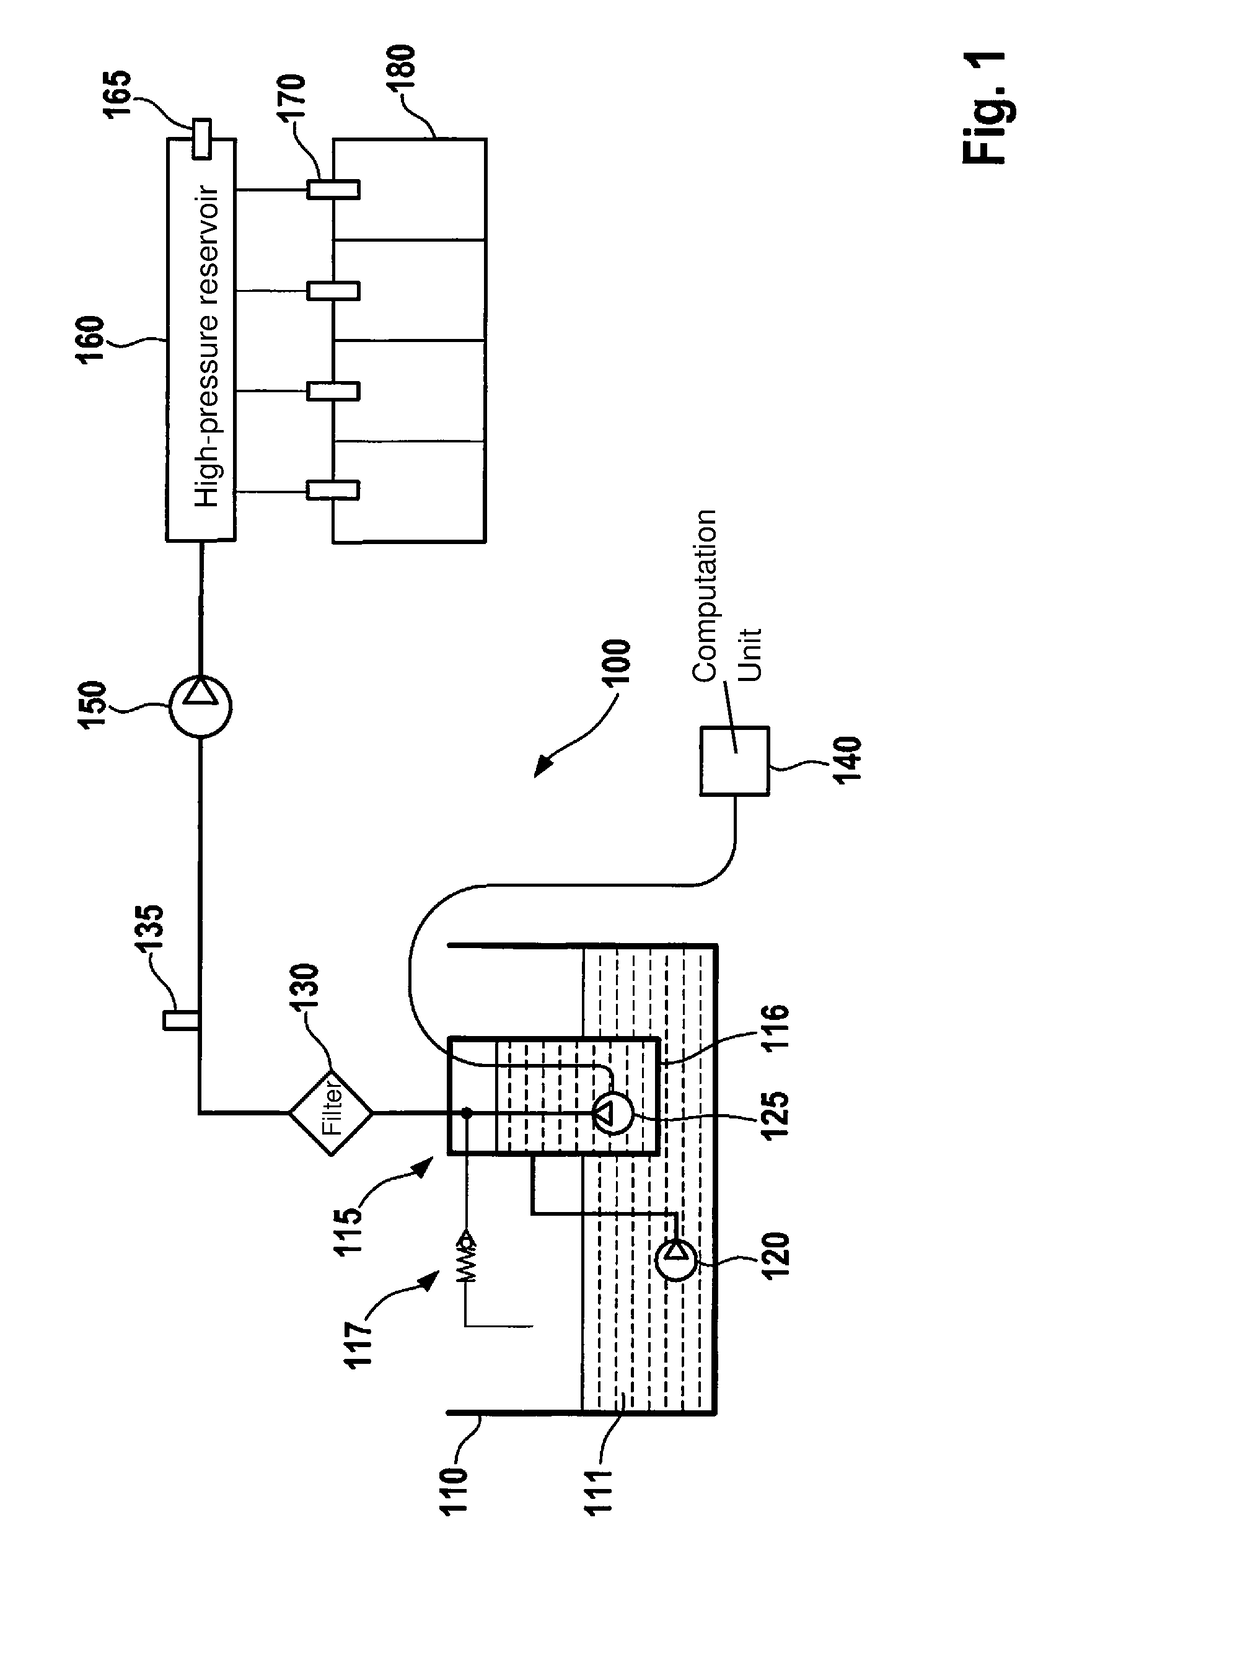 Method for operating an electric fuel pump